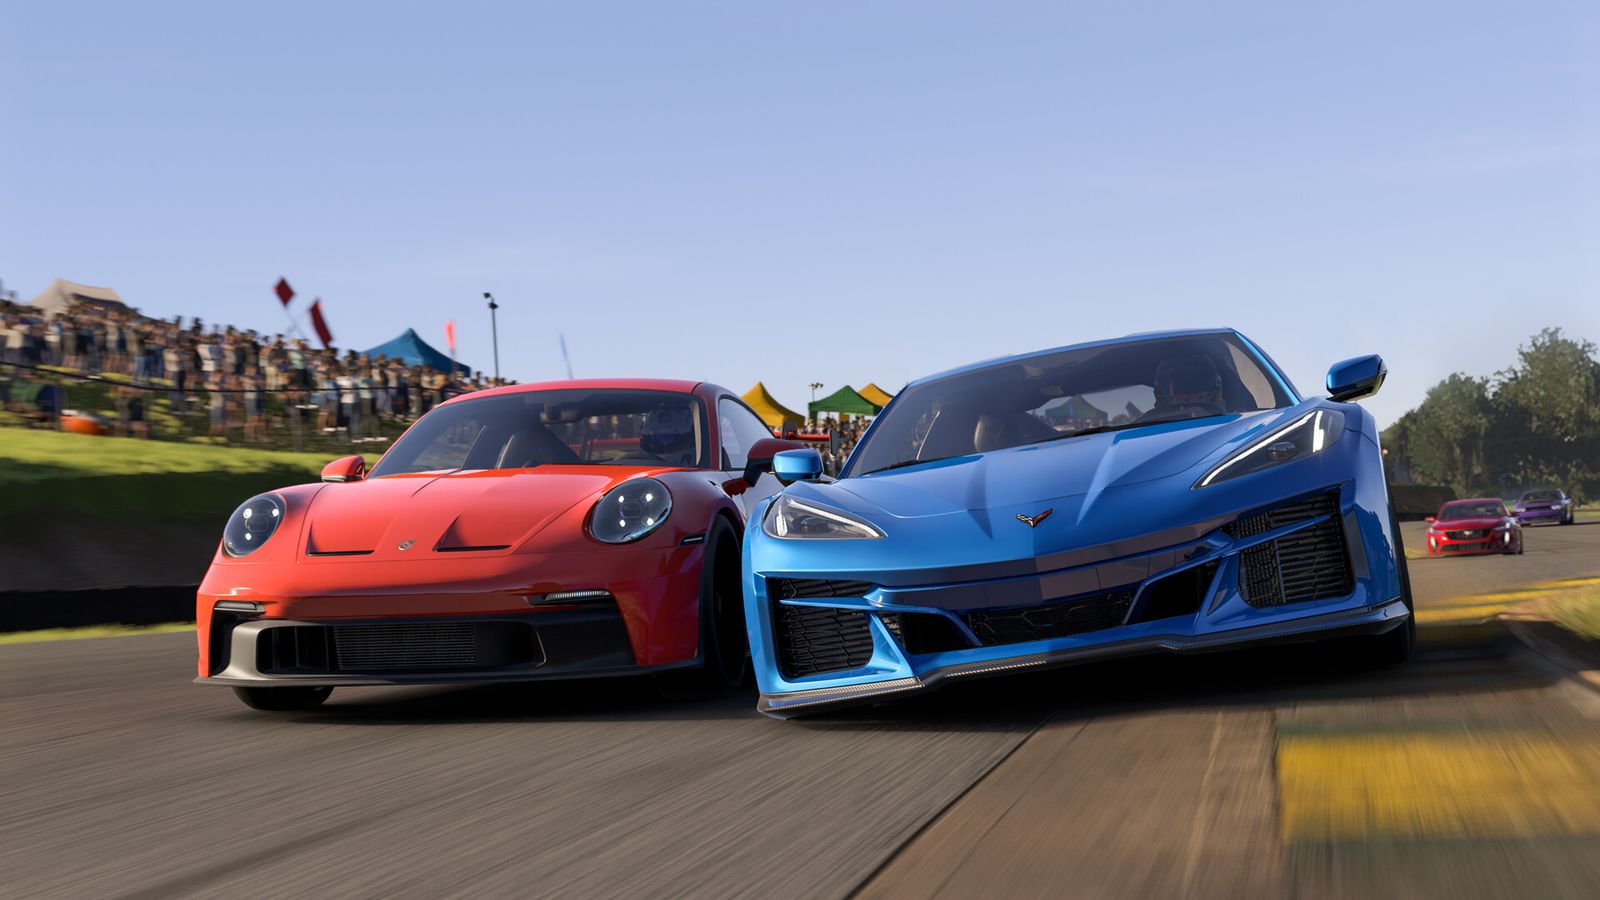 A red Porsche and blue Corvette racing side-by-side.